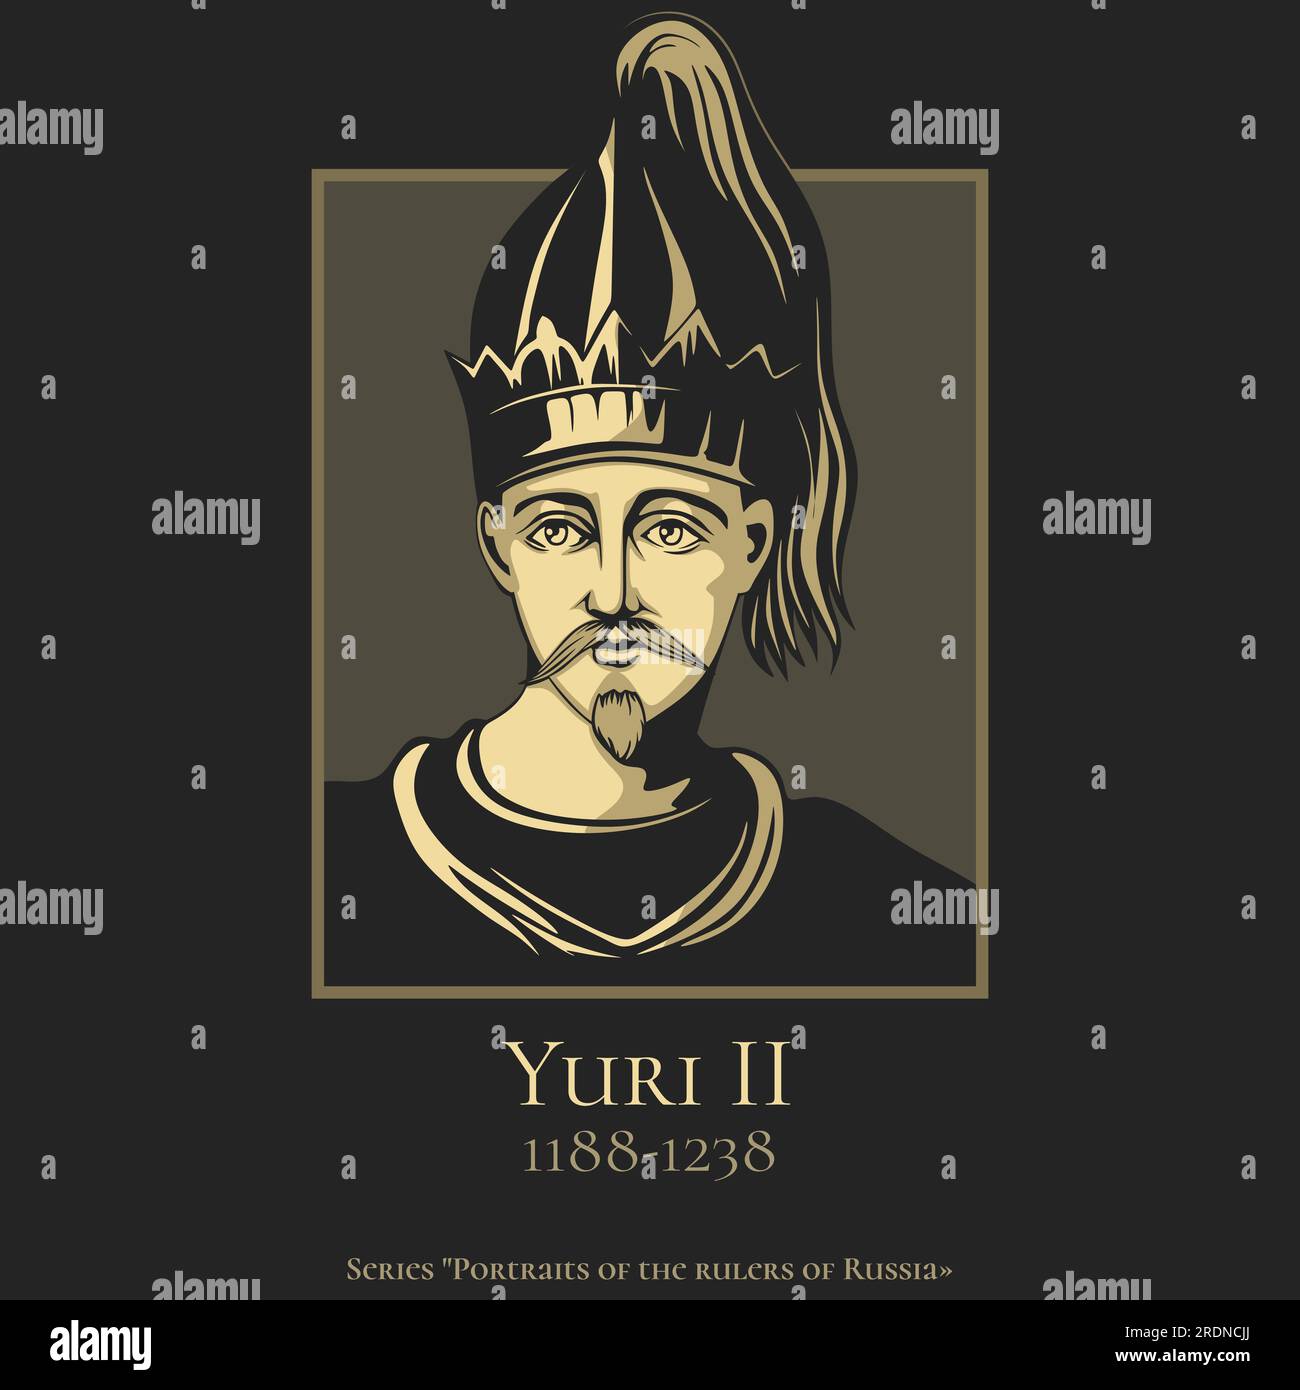 Portrait of the rulers of Russia. Yuri II (1188-1238), was the fourth Grand Prince of Vladimir who presided over Vladimir-Suzdal at the time of the Mo Stock Vector